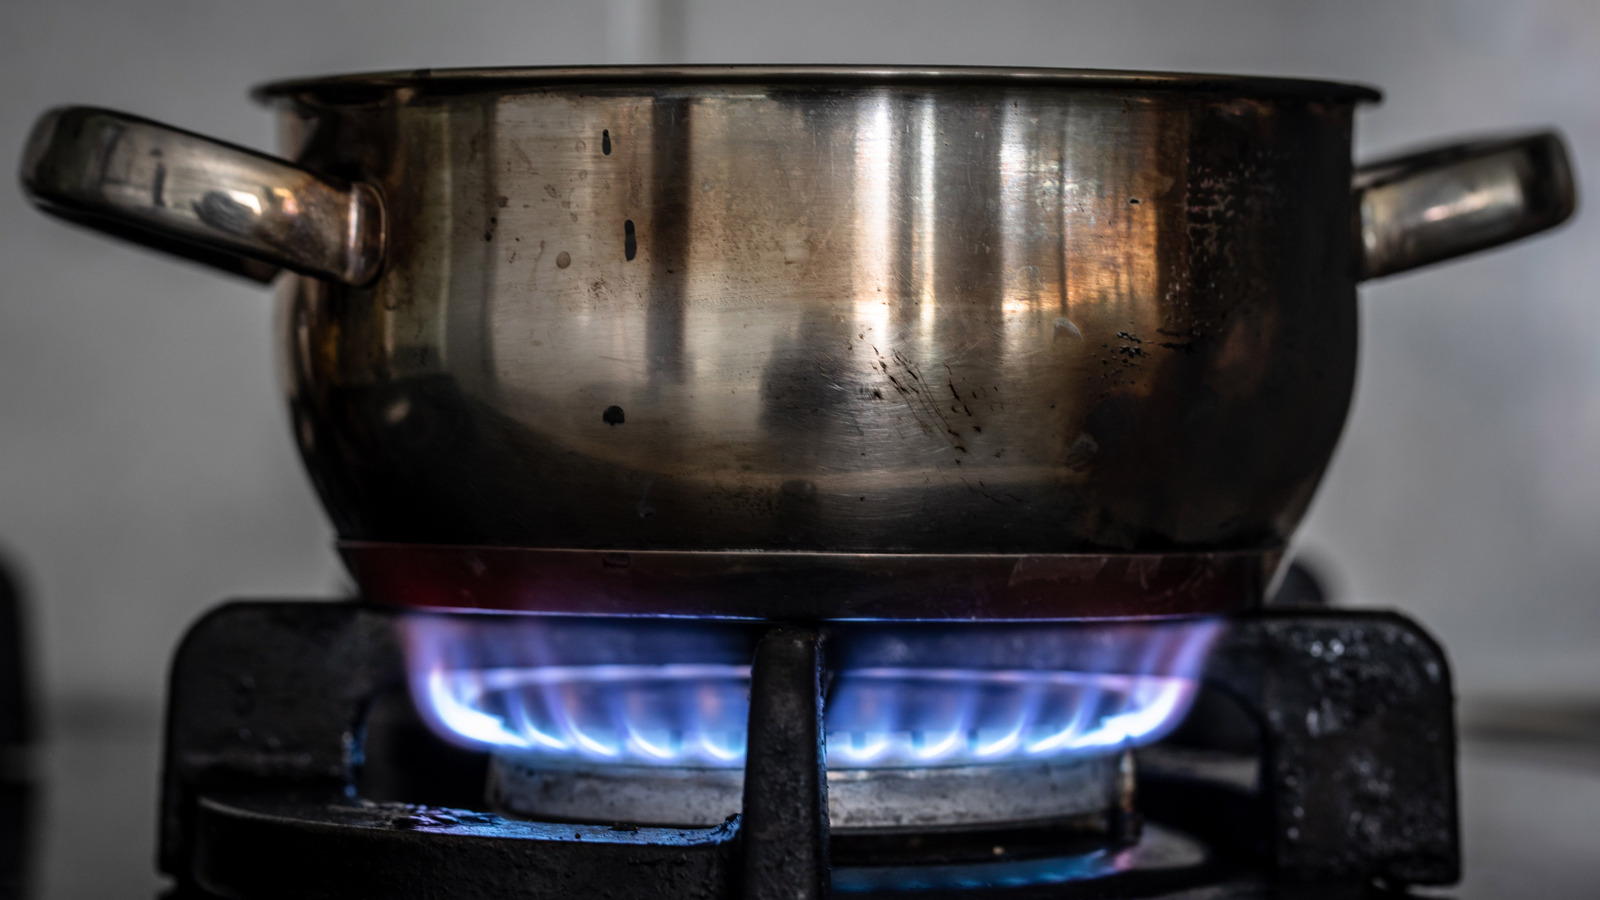 https://www.foodrepublic.com/img/gallery/stop-believing-the-myth-that-gas-stoves-make-food-taste-better/l-intro-1697719580.jpg